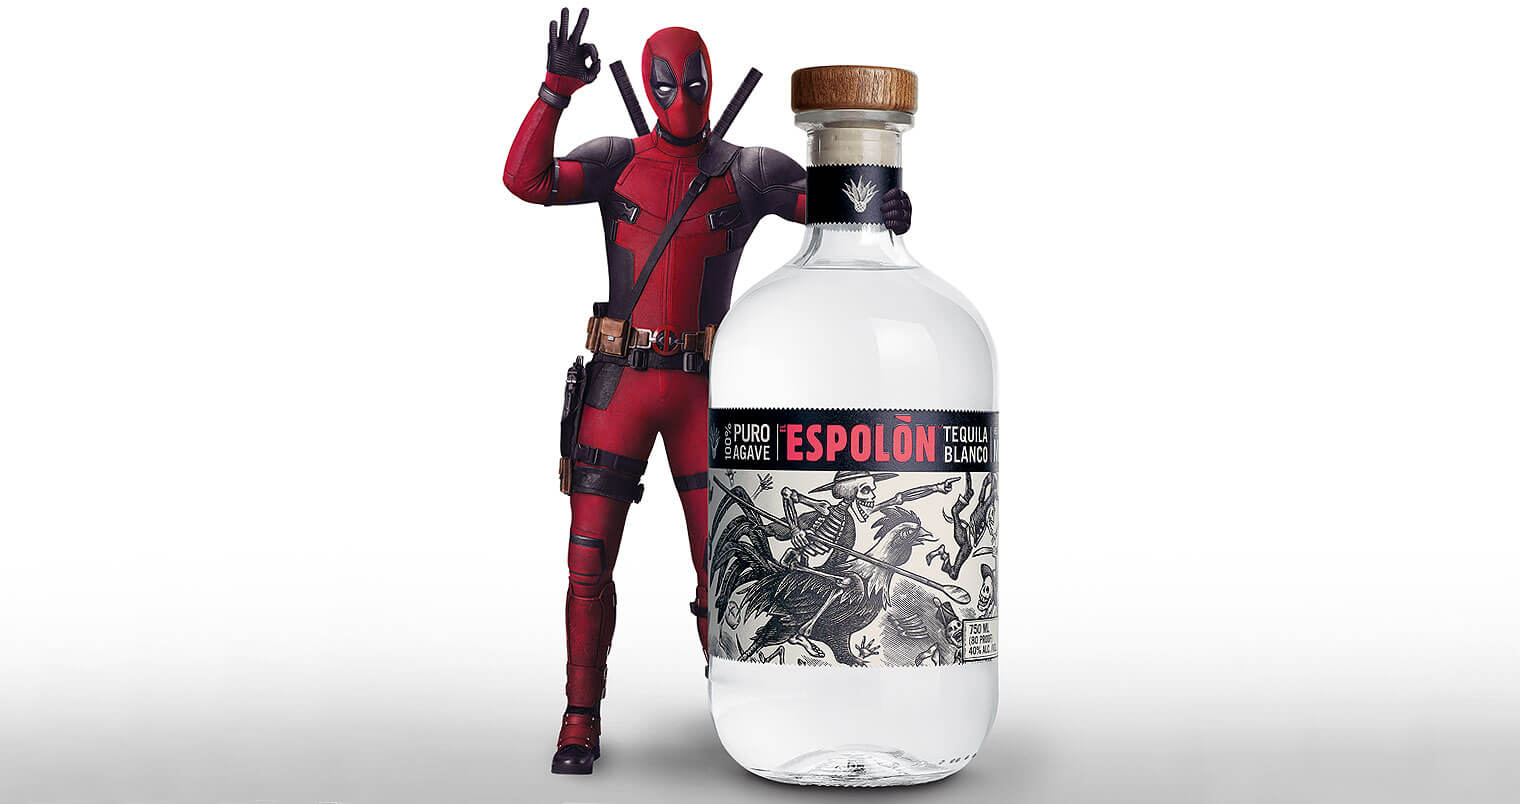 Deadpool is the New Creative Director for Espolòn Tequila, featured image